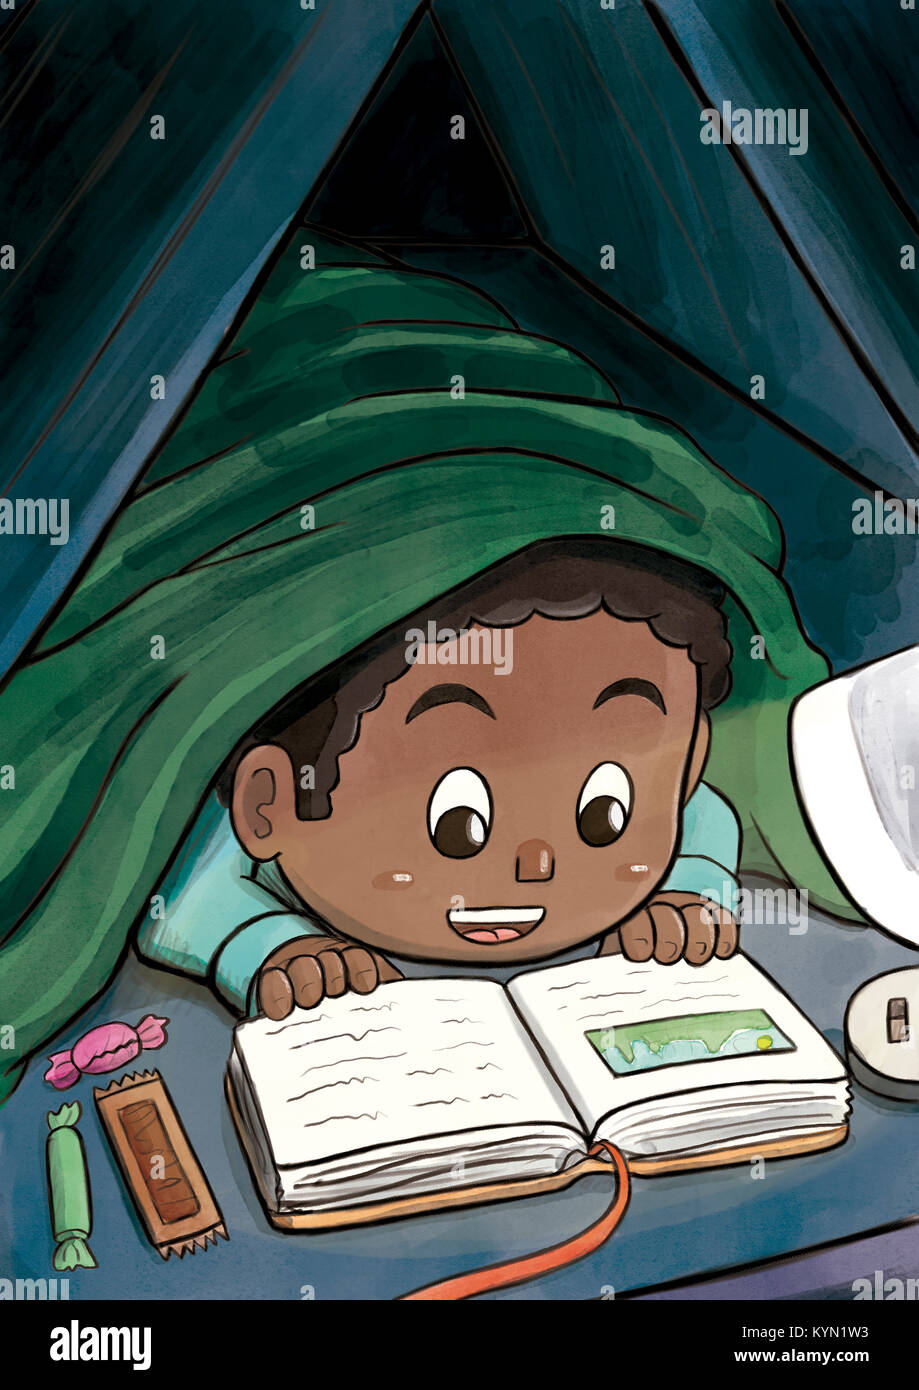 Black Boy Hiding Beneath the Blanket Reading a Picture Book Stock Photo